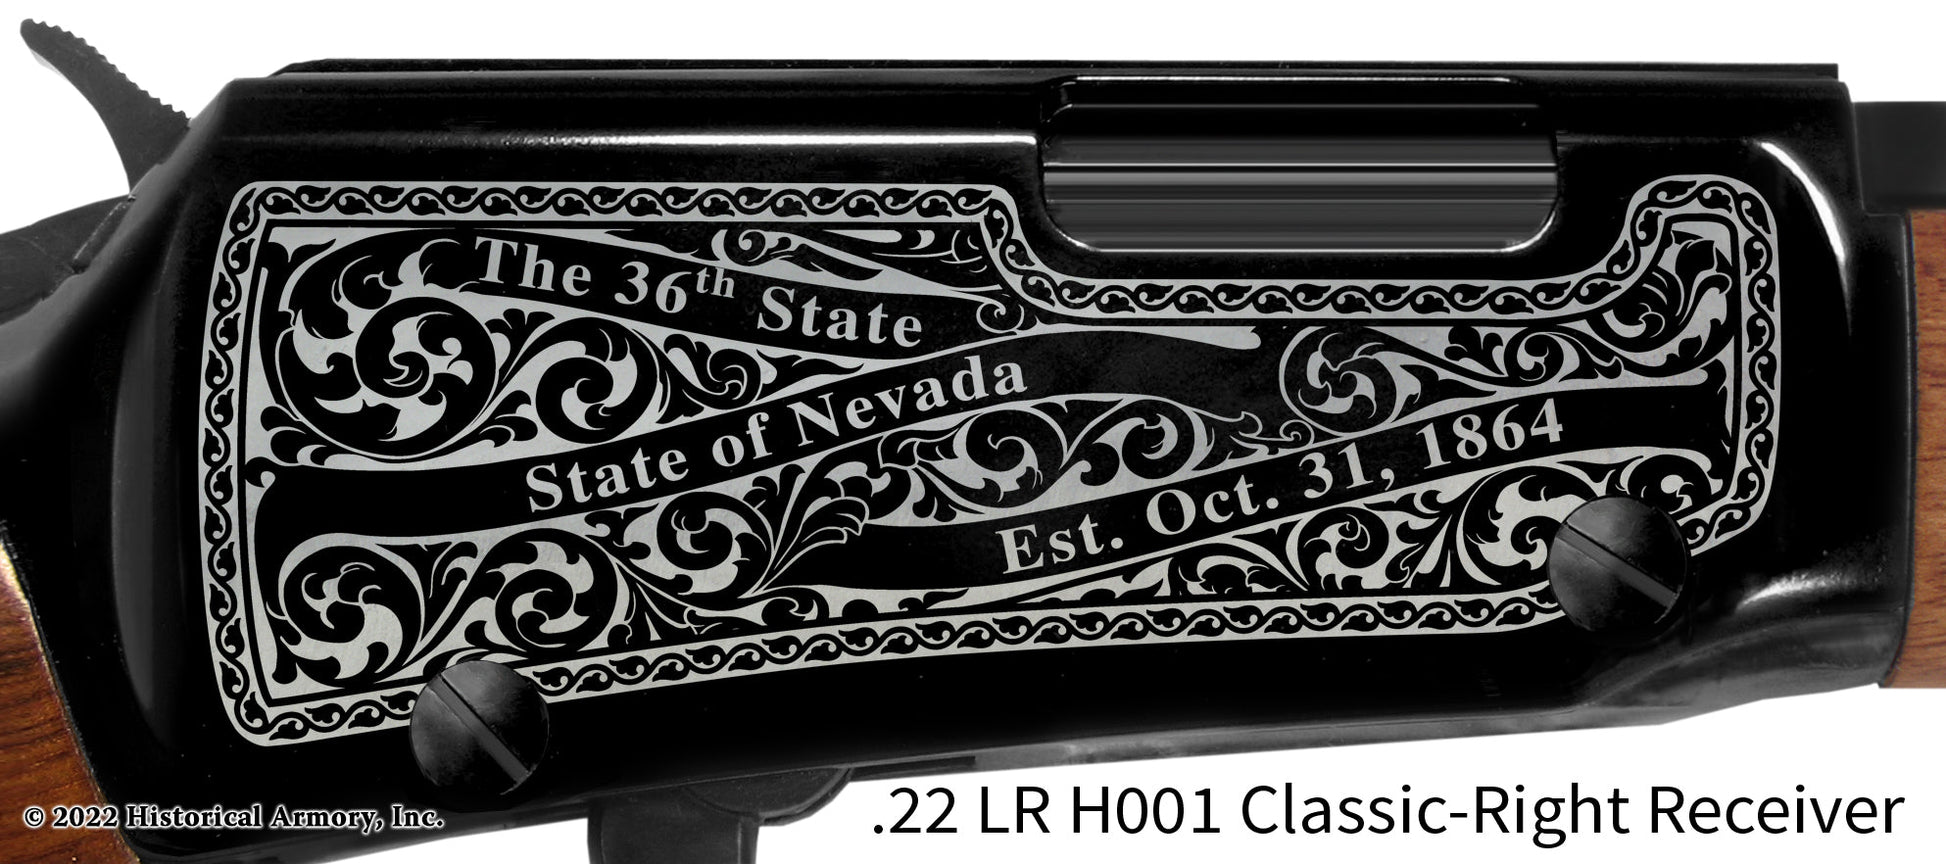 Lincoln County Nevada Engraved Henry H001 Rifle